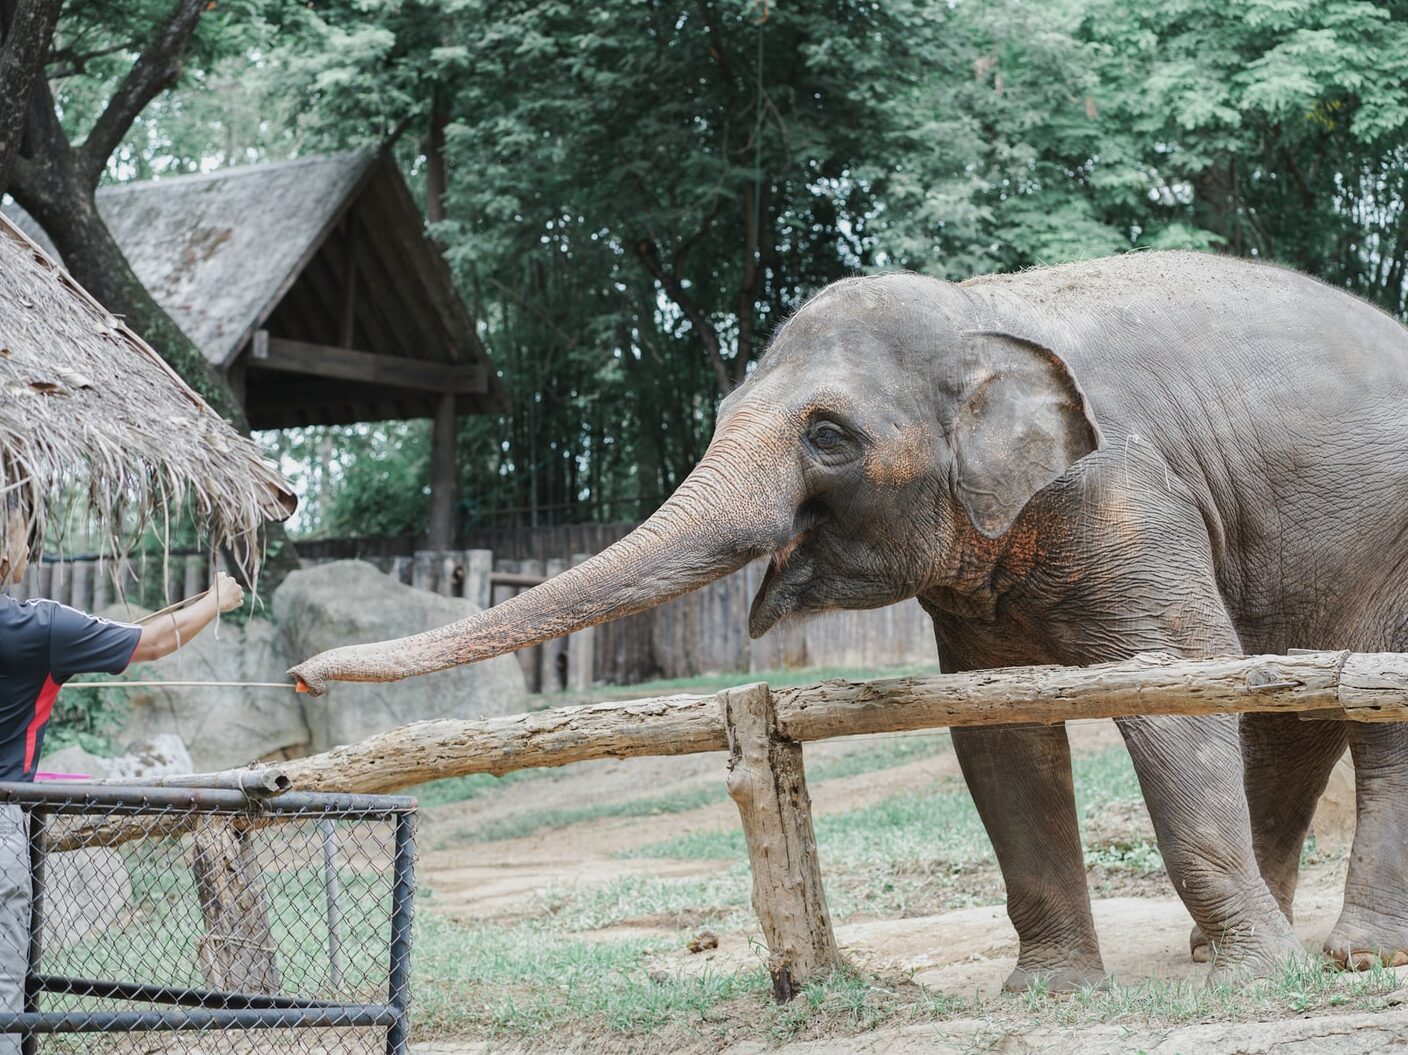 person reaching for elephant's trunk